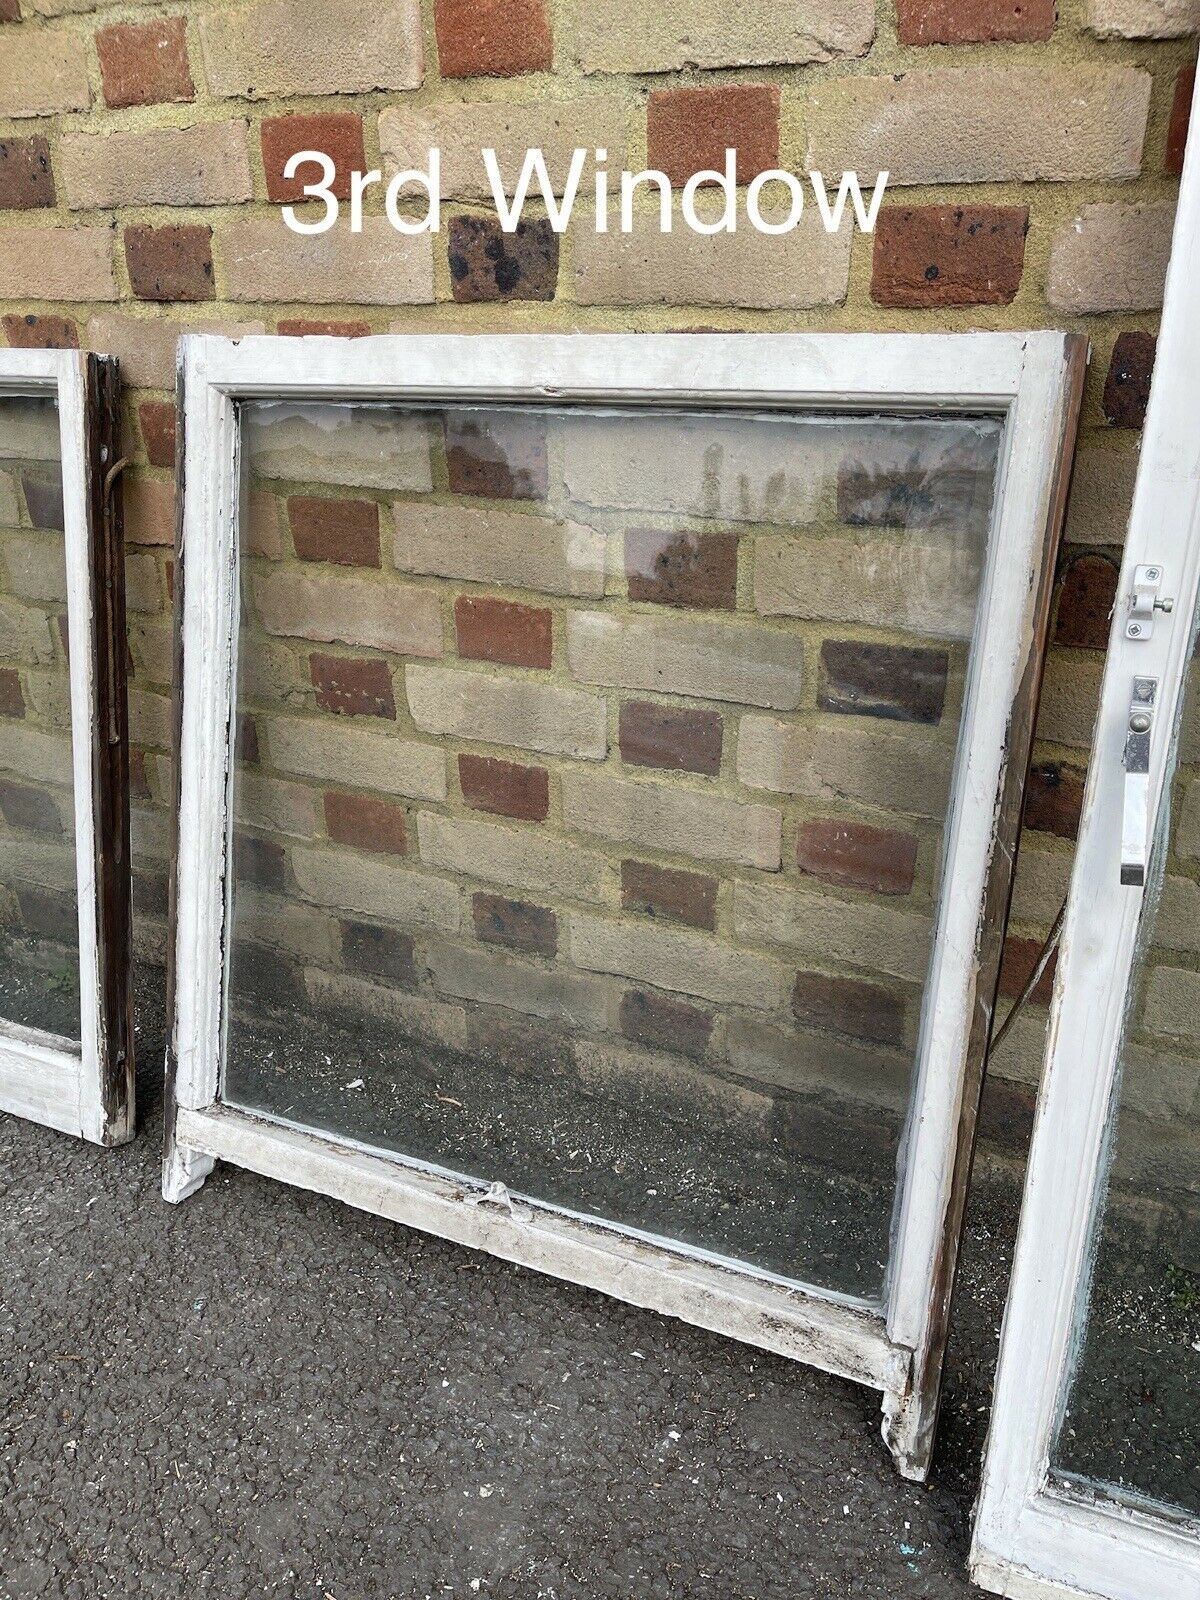 Job Lot Of Reclaimed Old Wooden Panel Sash Windows Cylinder Wavy Glass X 4